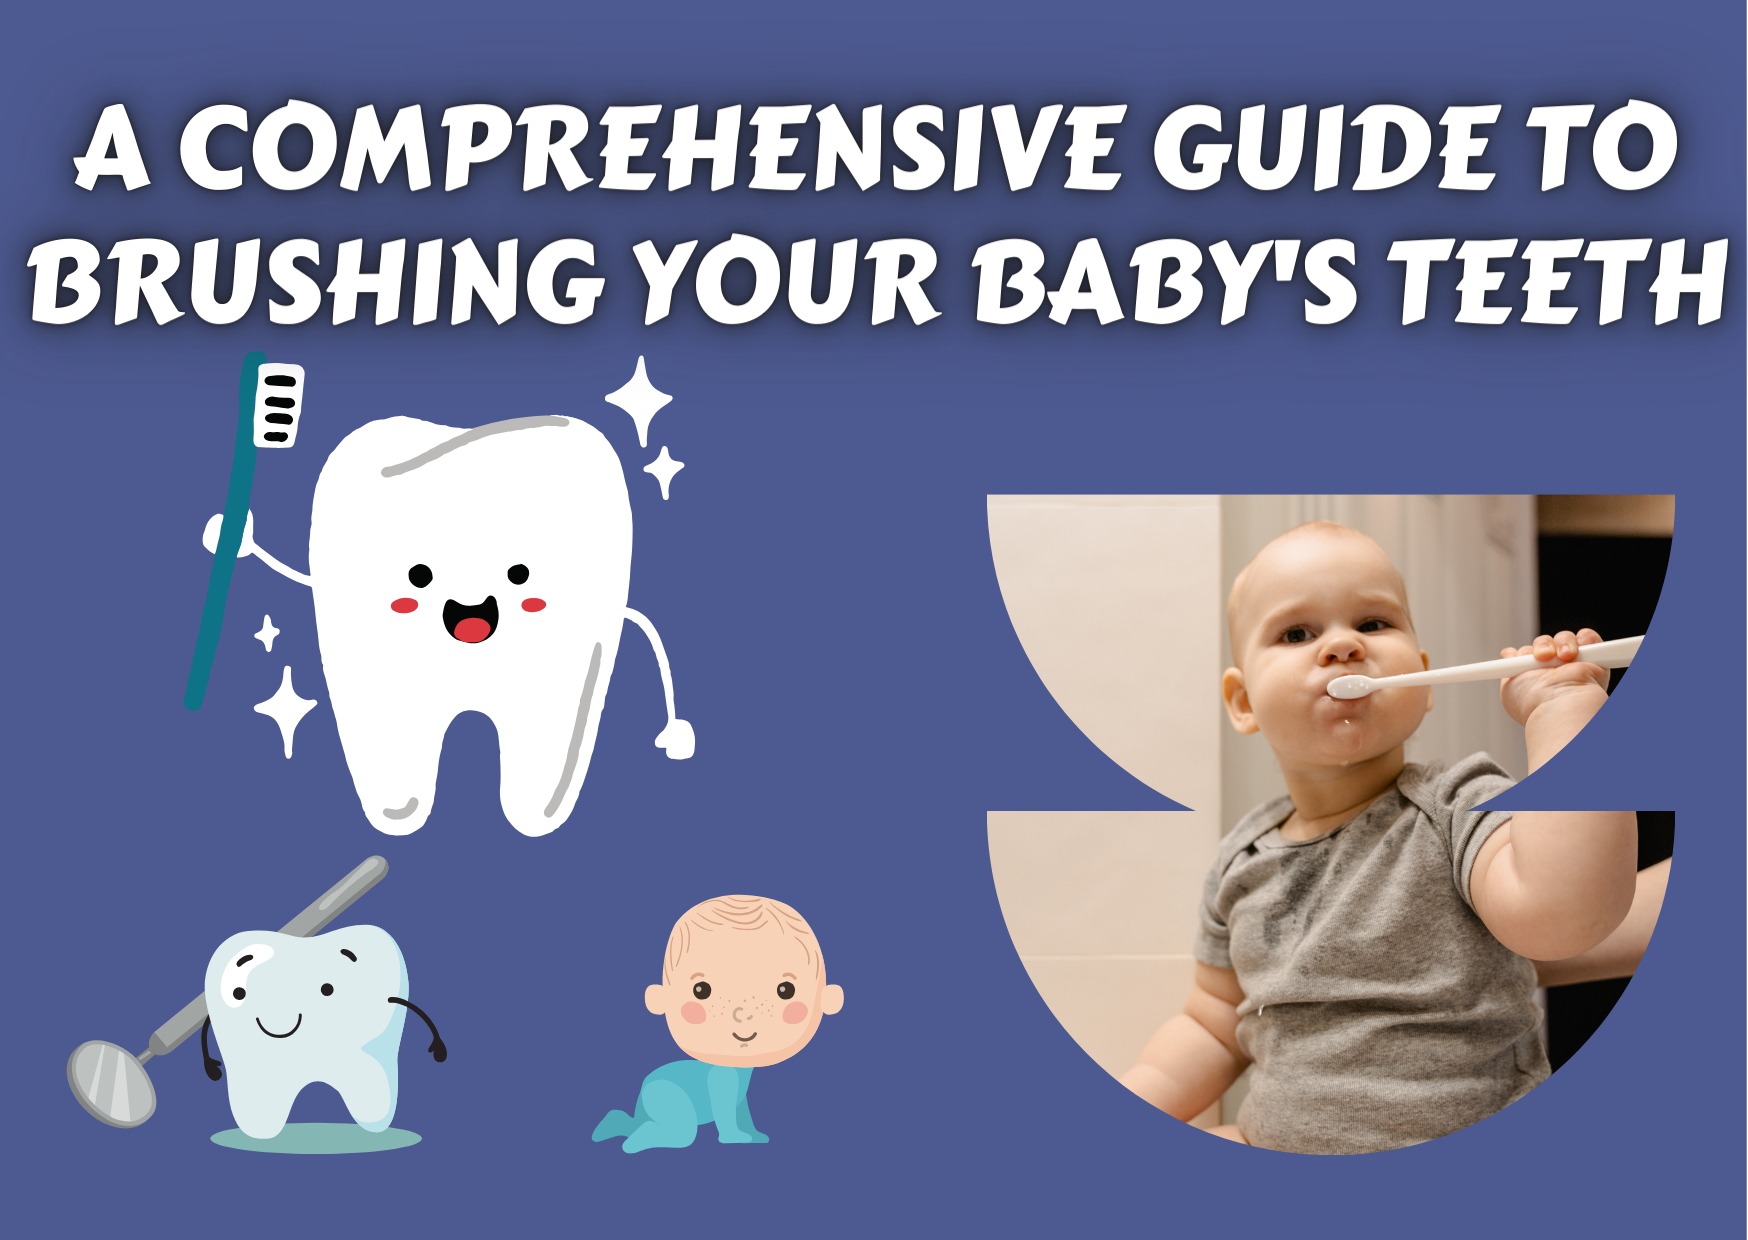 A Comprehensive Guide to Brushing Your Baby's Teeth